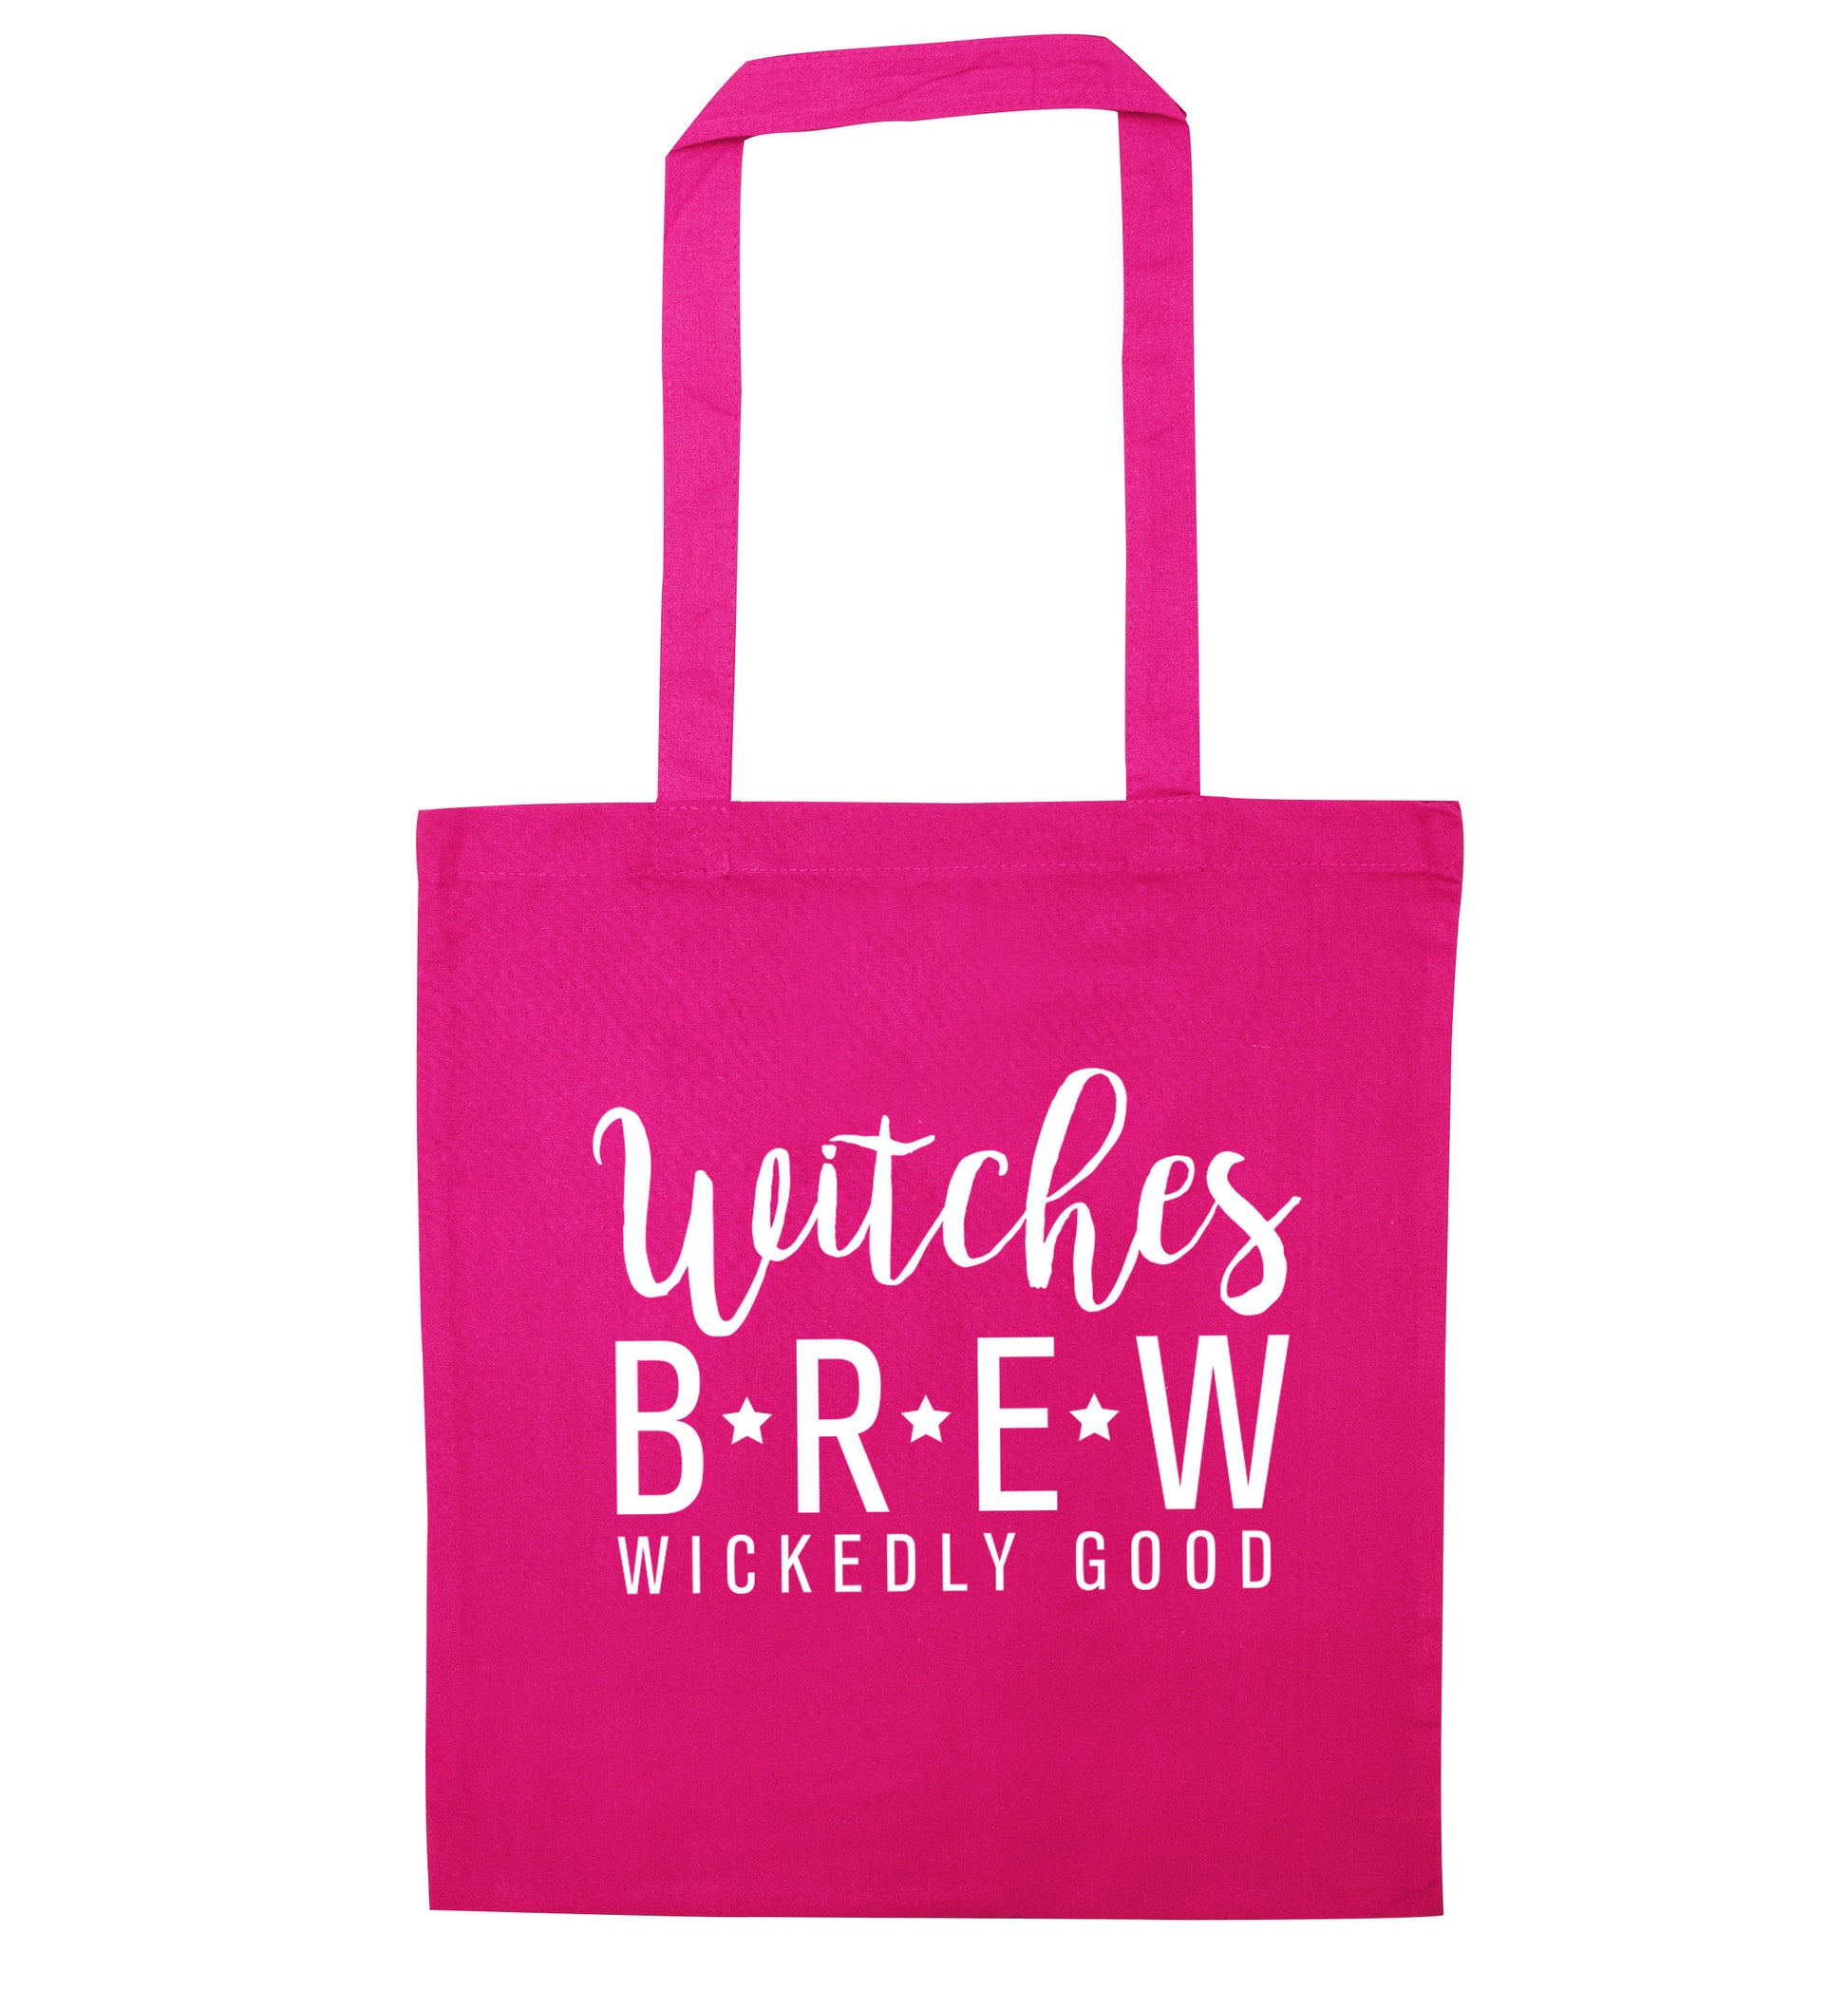 Witches Brew wickedly good pink tote bag